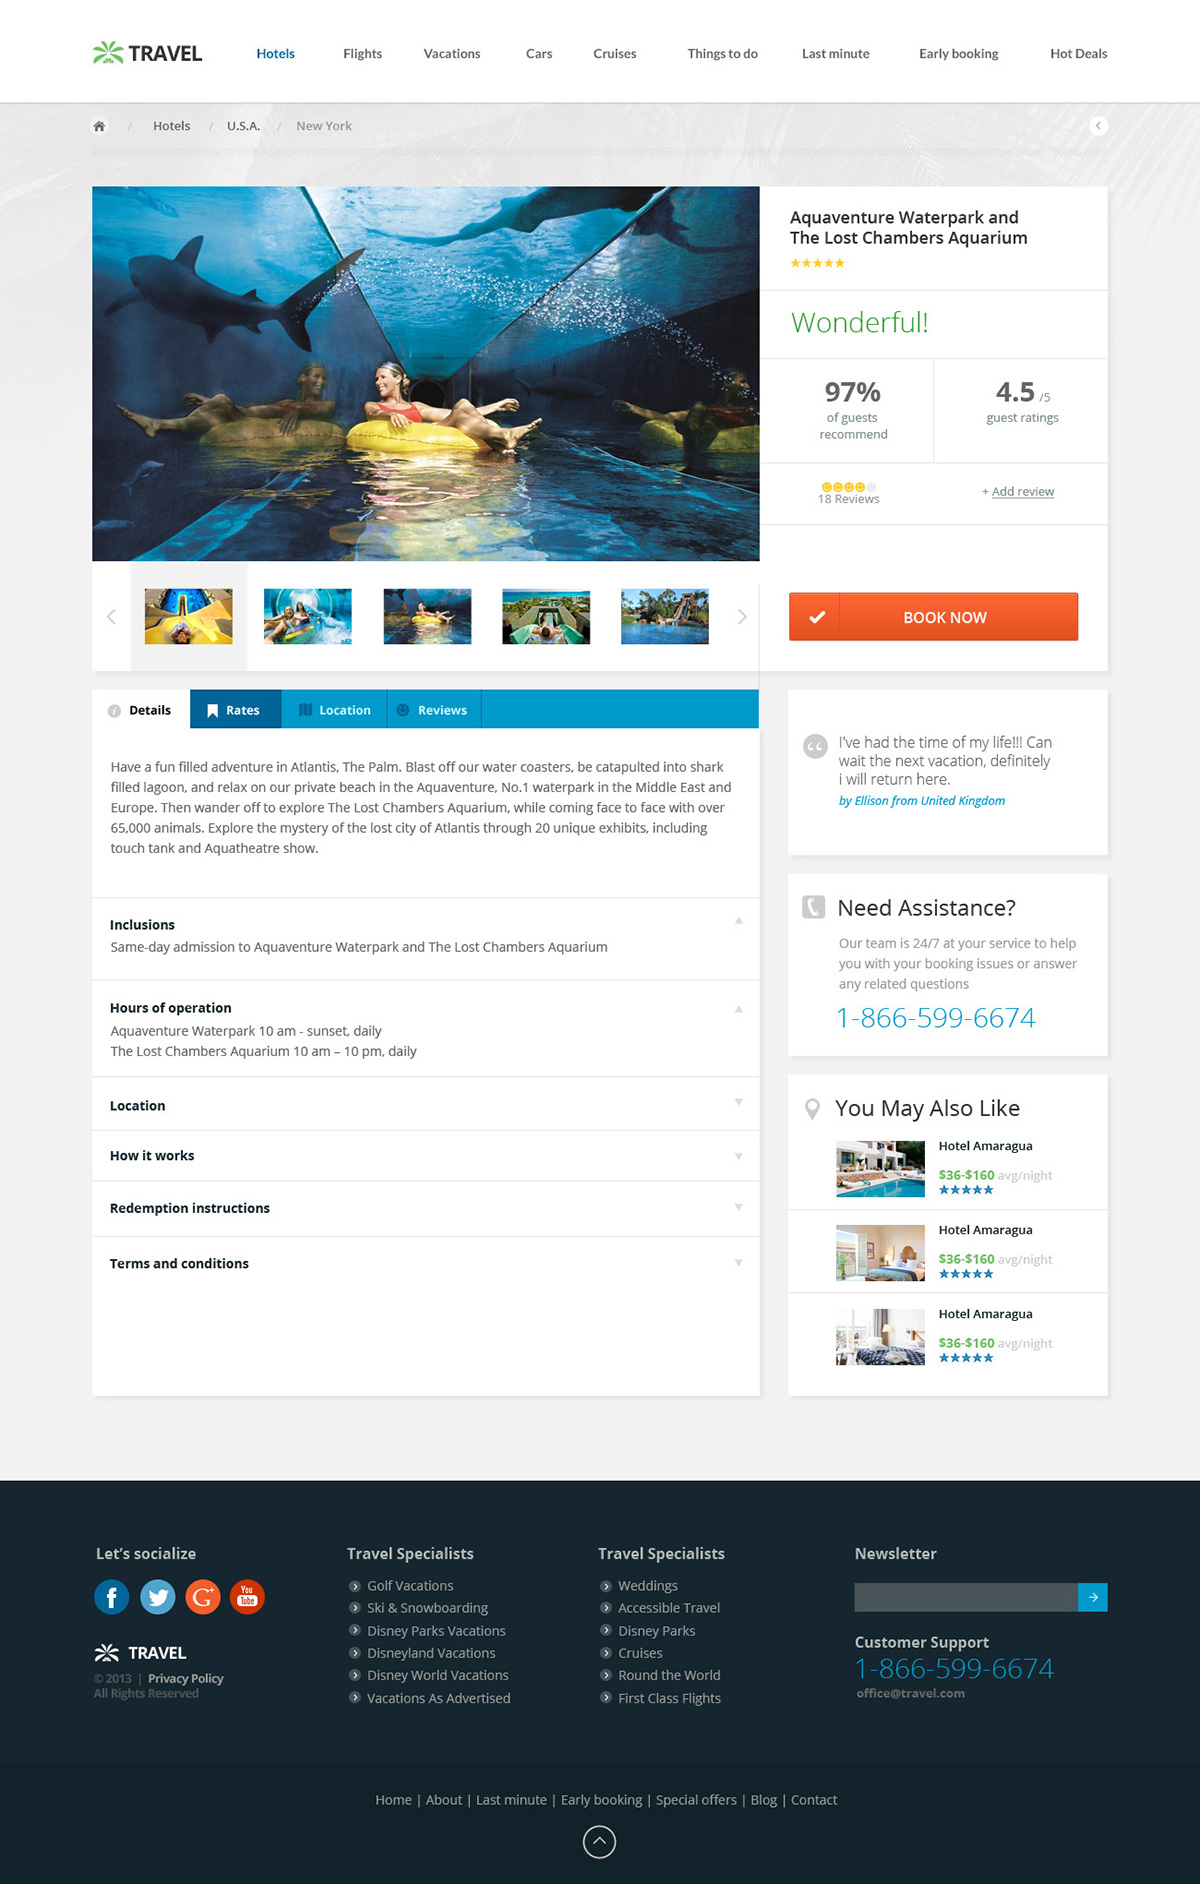 Booking Cruises Deals early booking Flights hotels last minute psd template rates real estate Rent a Car room things to do travel agency